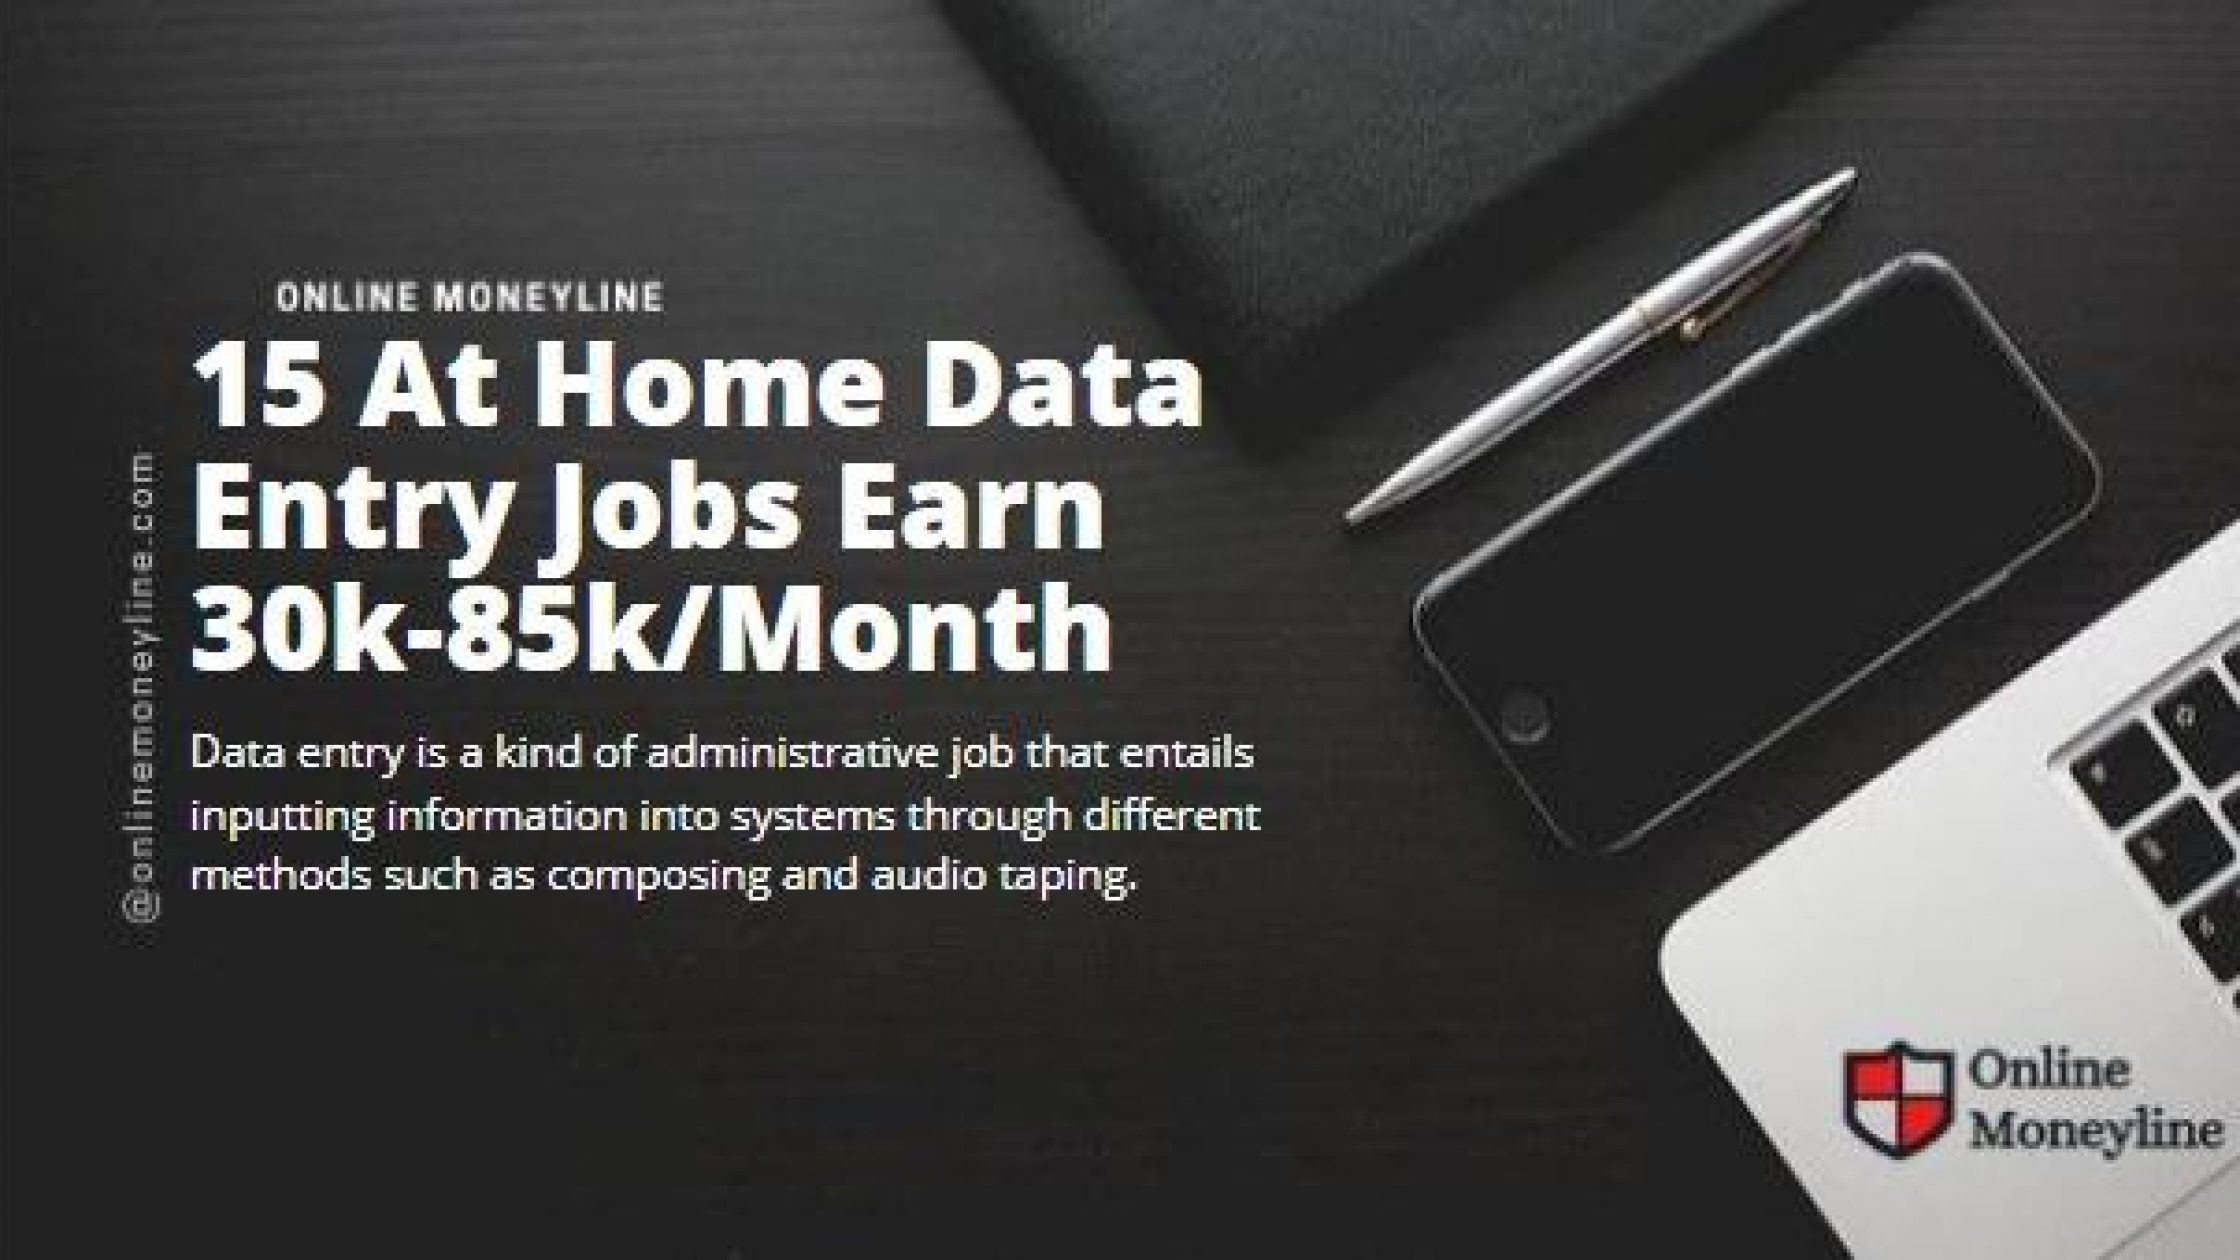 15 At Home Data Entry Jobs Earn 30k-85k/Month